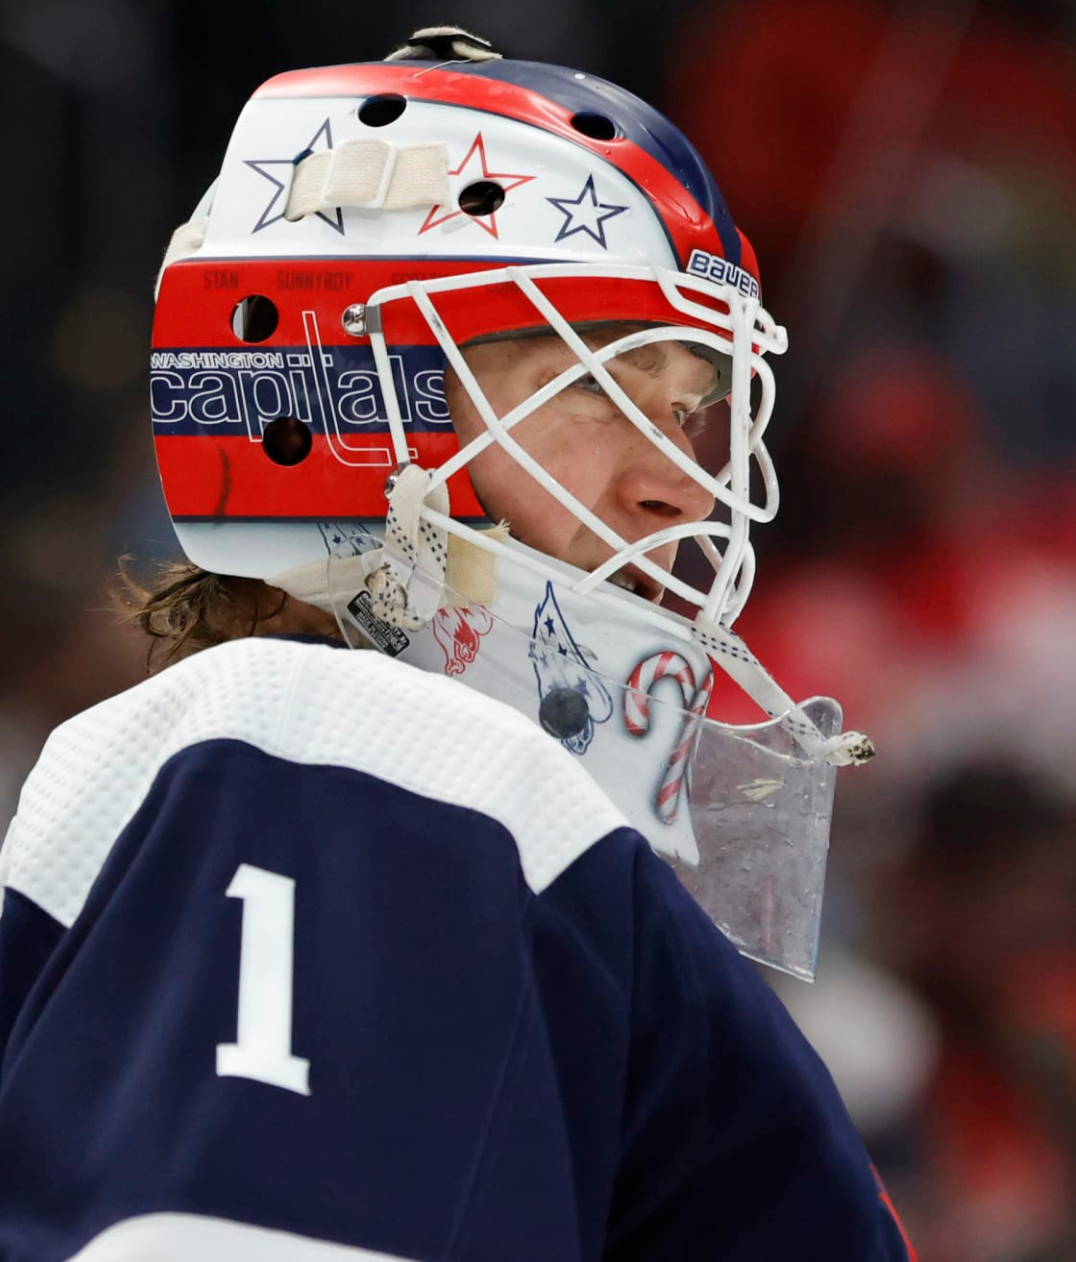 Pheonix Copley of the Washington Capitals looks on at the action during an NHL game 